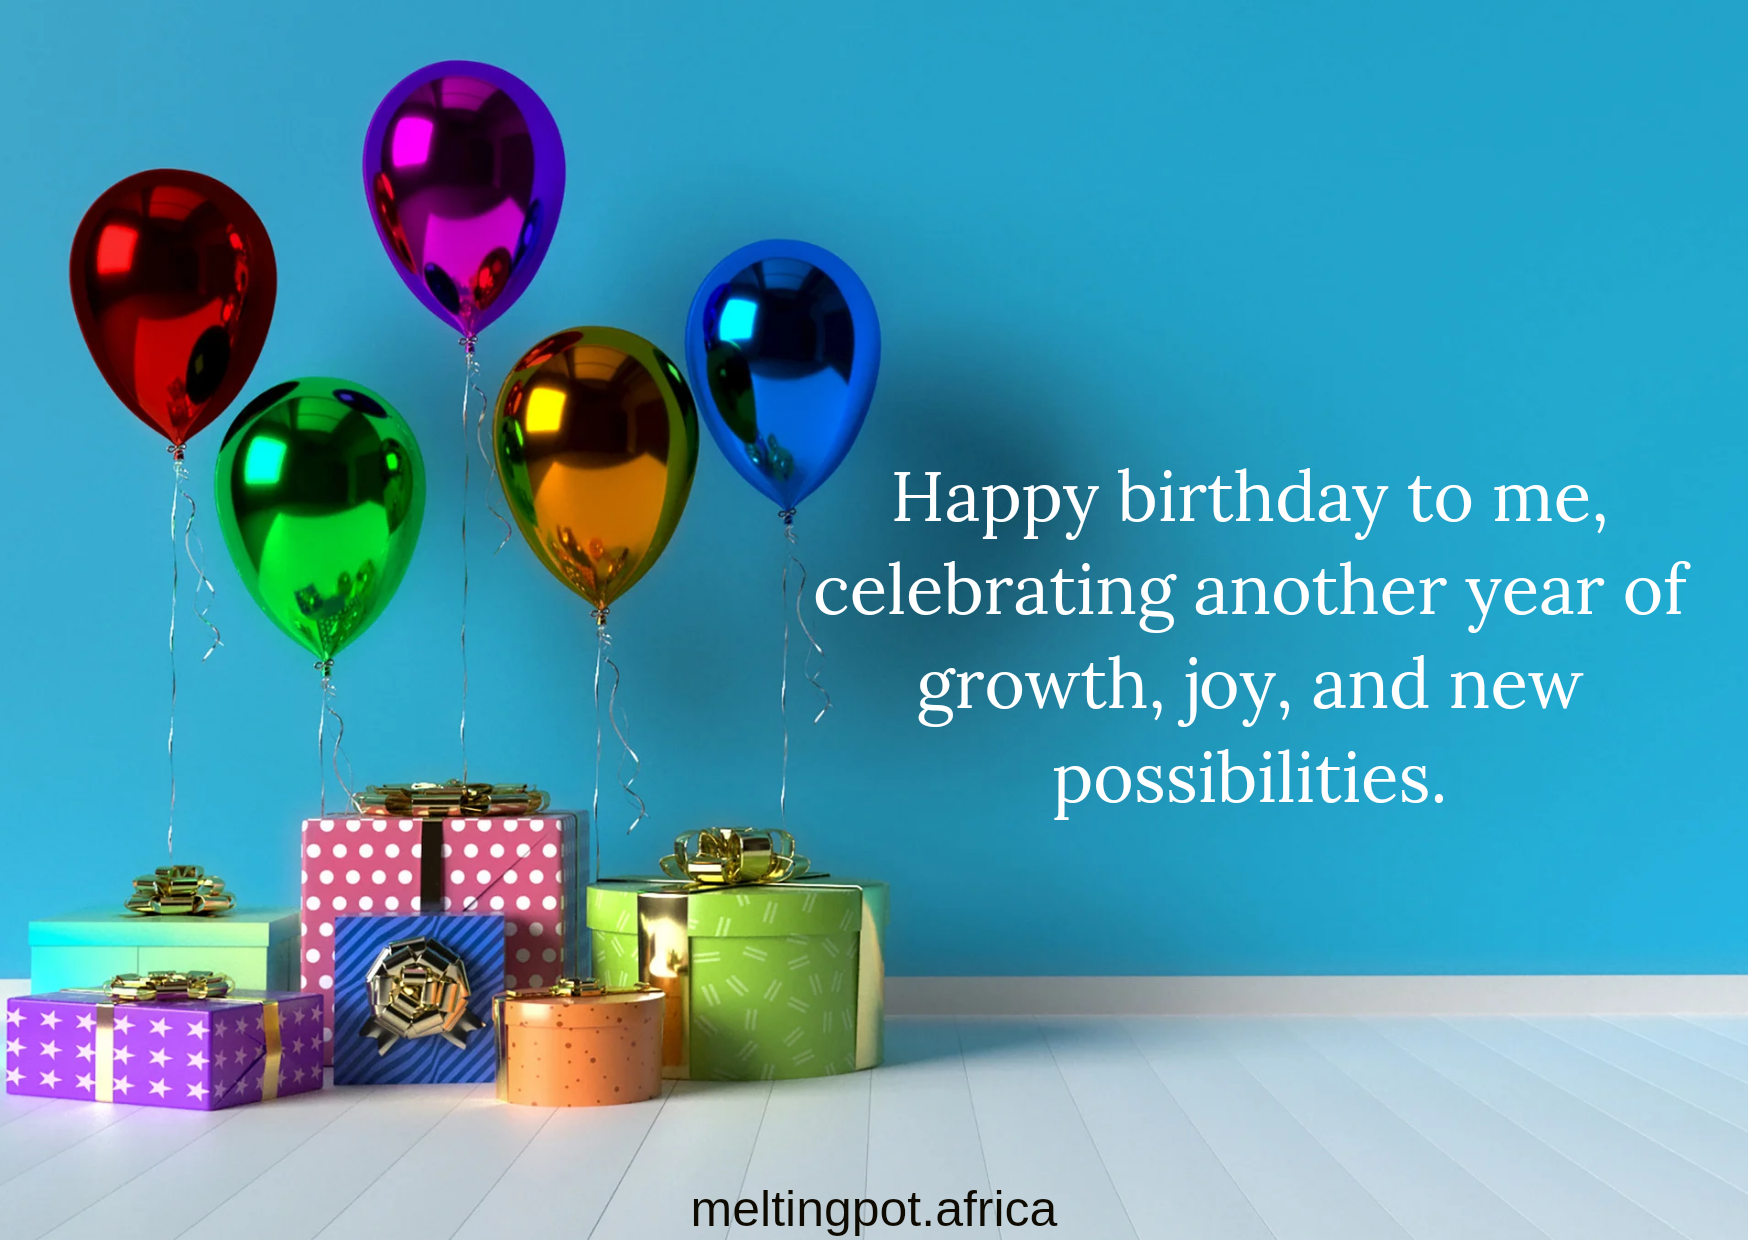 50 Birthday Wishes For Myself – Inspirational Quotes, Messages & Greetings
We have touched everything in this blog. Give yourself the birthday wish you deserve. Explore long heartfelt wishes, short birthday wishes, funny ones, and more in English, Yoruba, Arabic or pidgin.